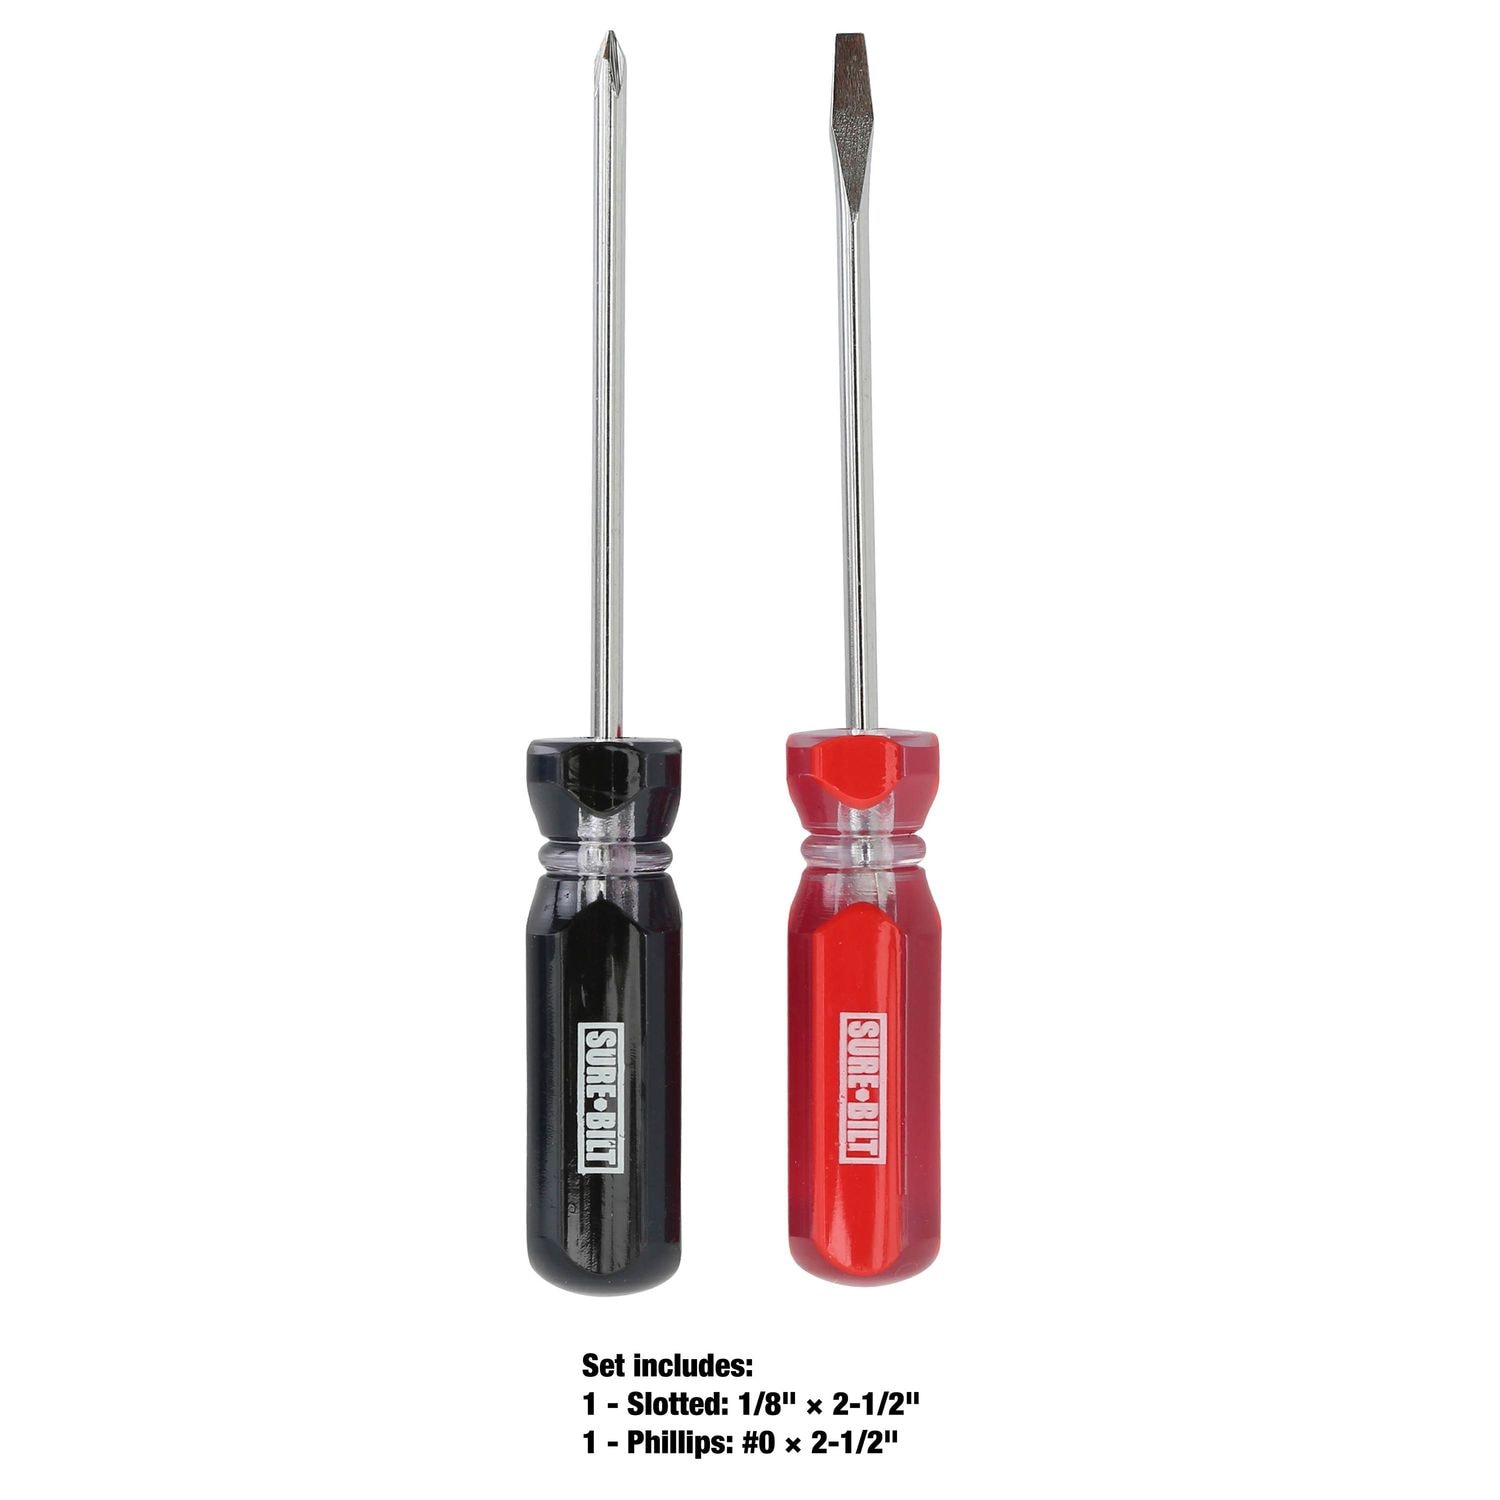  Great Neck 92080 20 Piece Screwdriver Set, Hook and